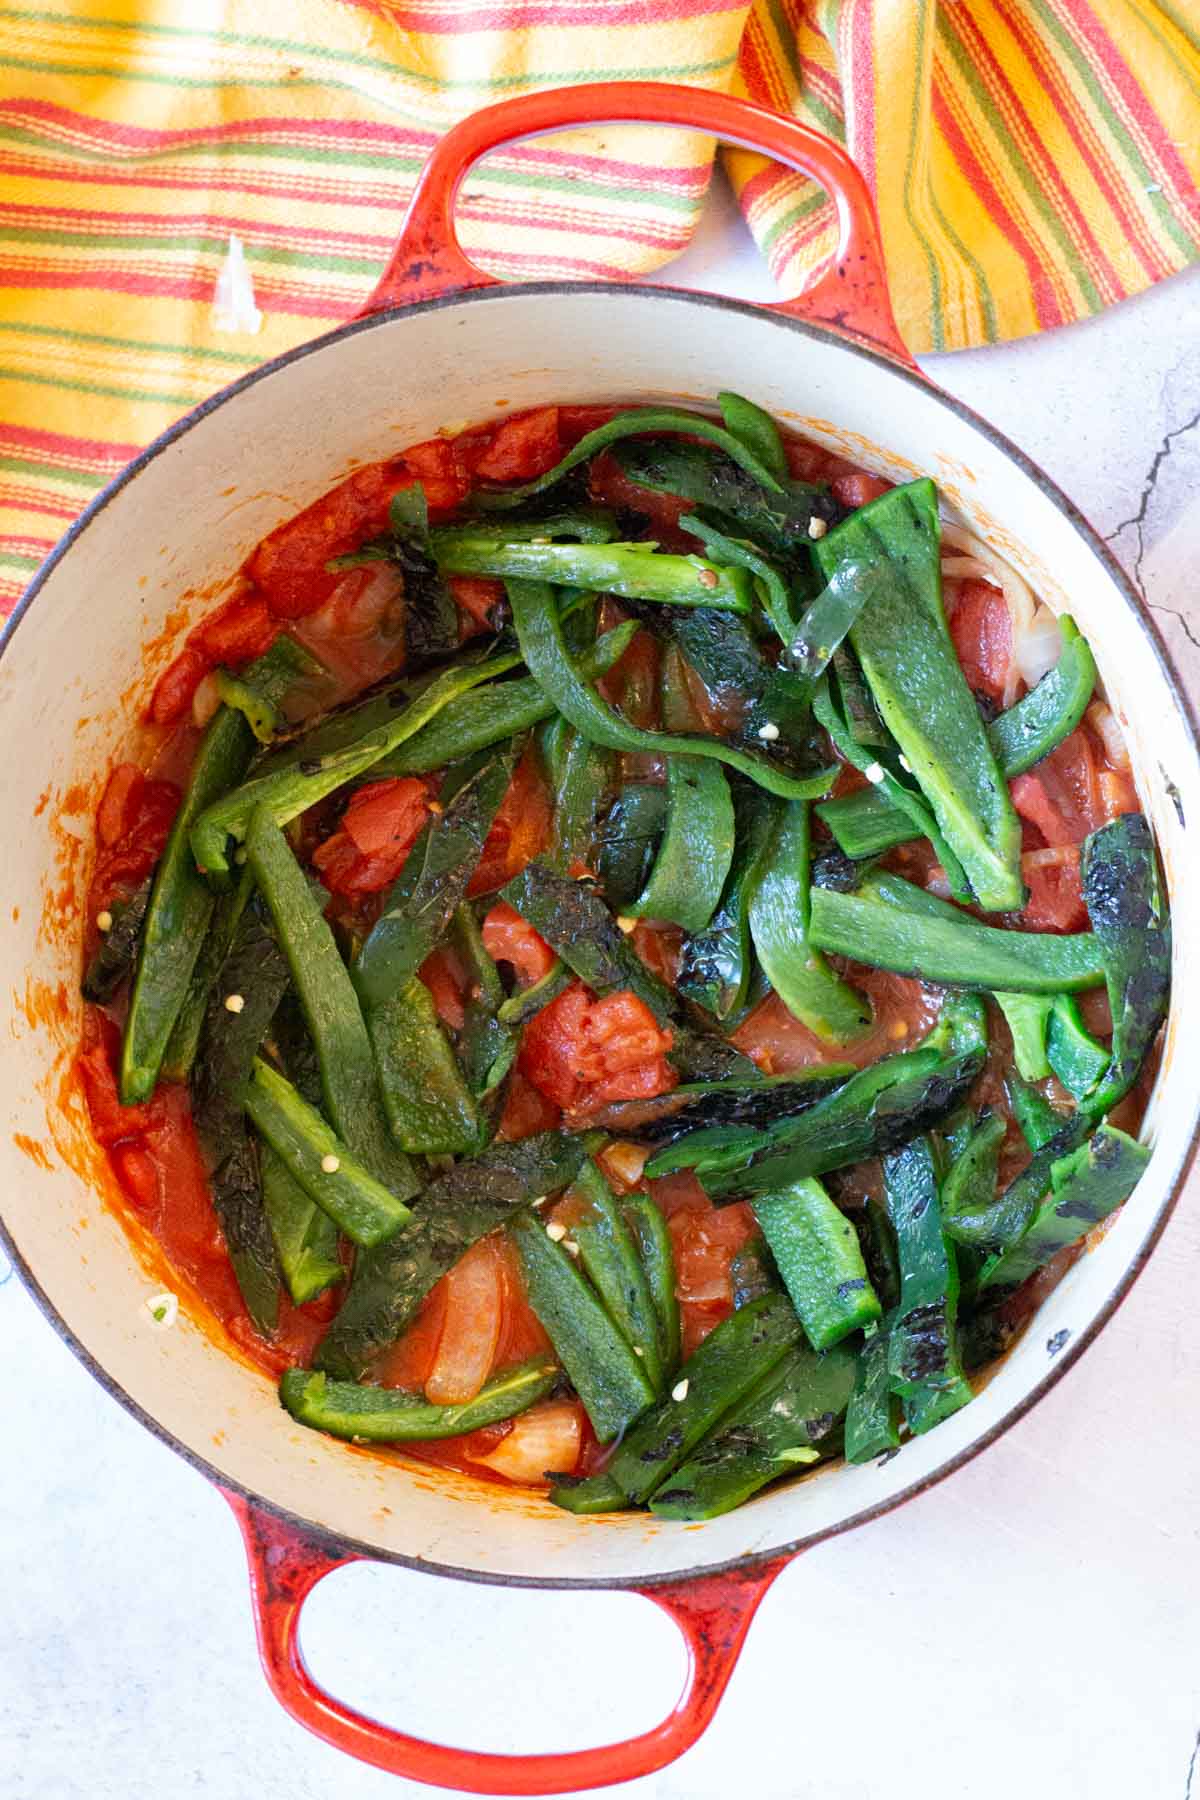 Poblano peppers and tomatoes in a dutch oven to make Mexican short ribs.